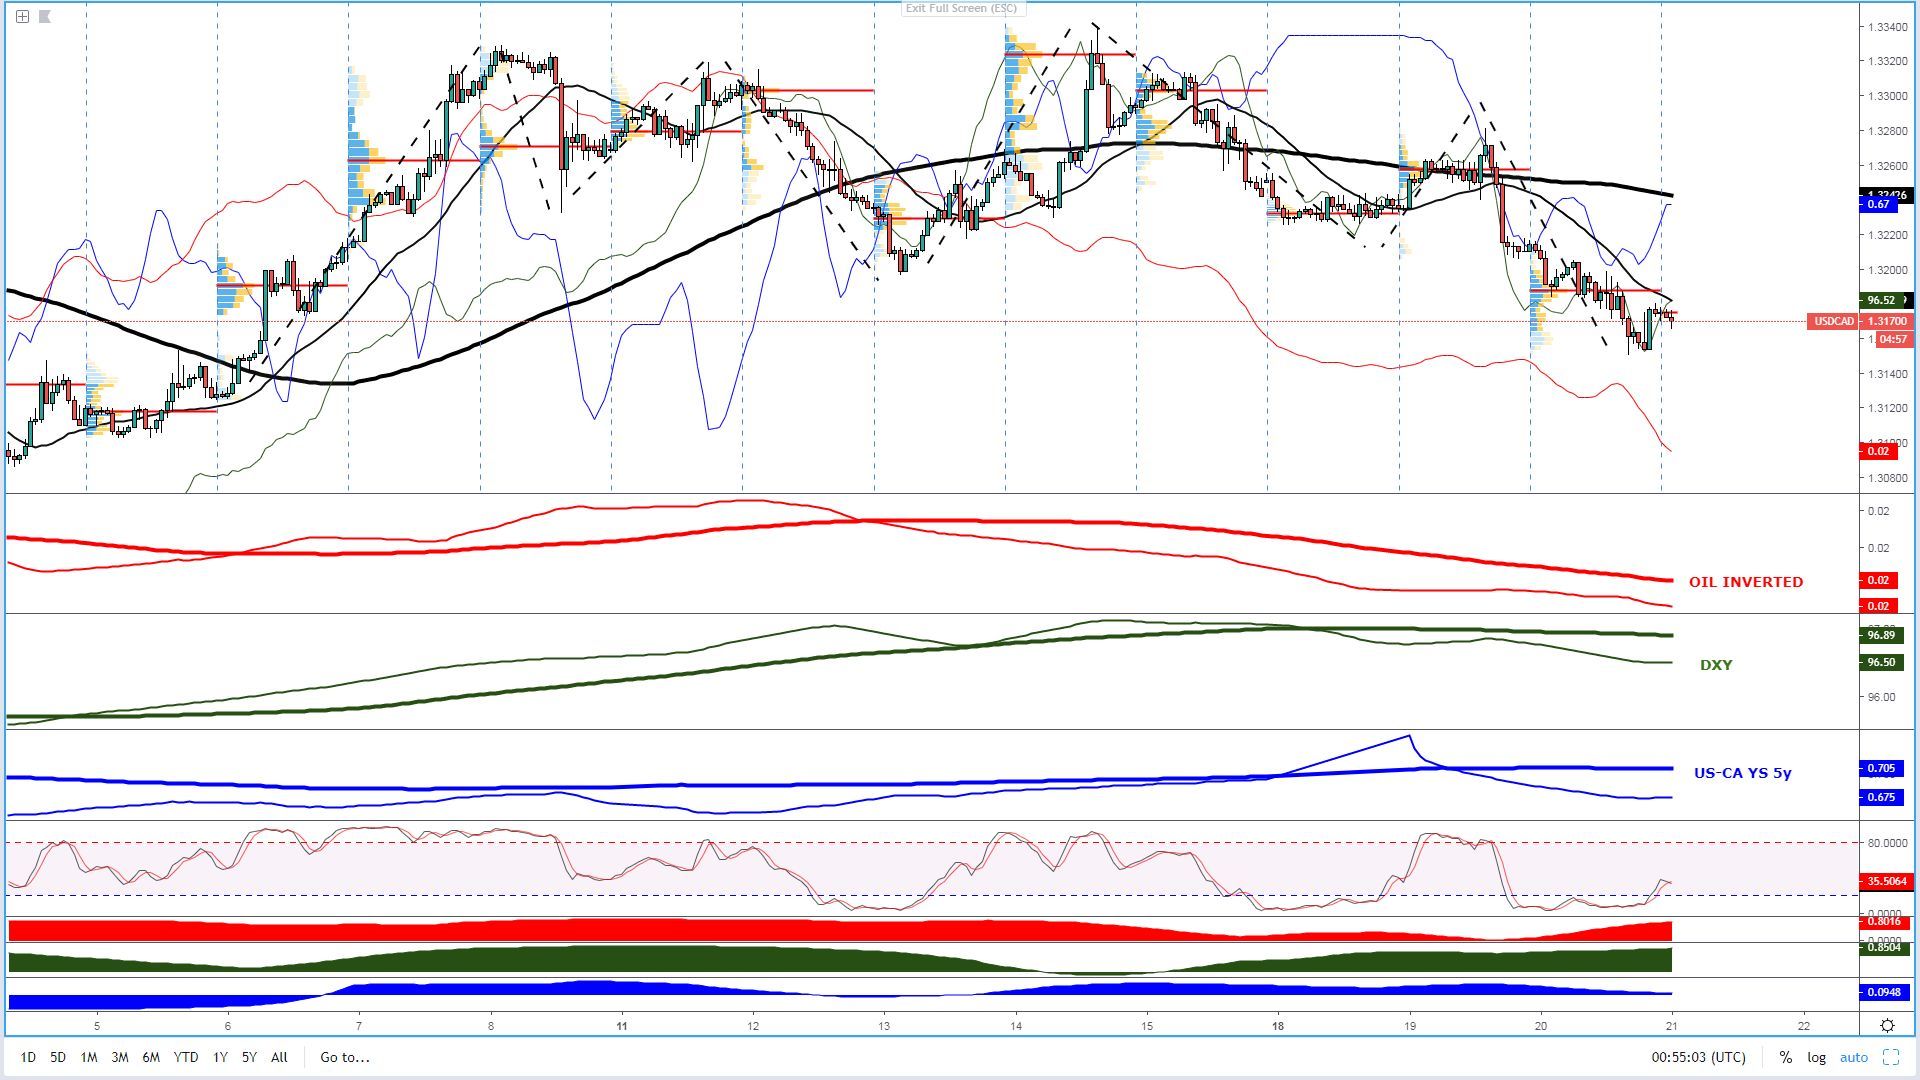 Oil Inverted, DXY, US-CA YS 5Y